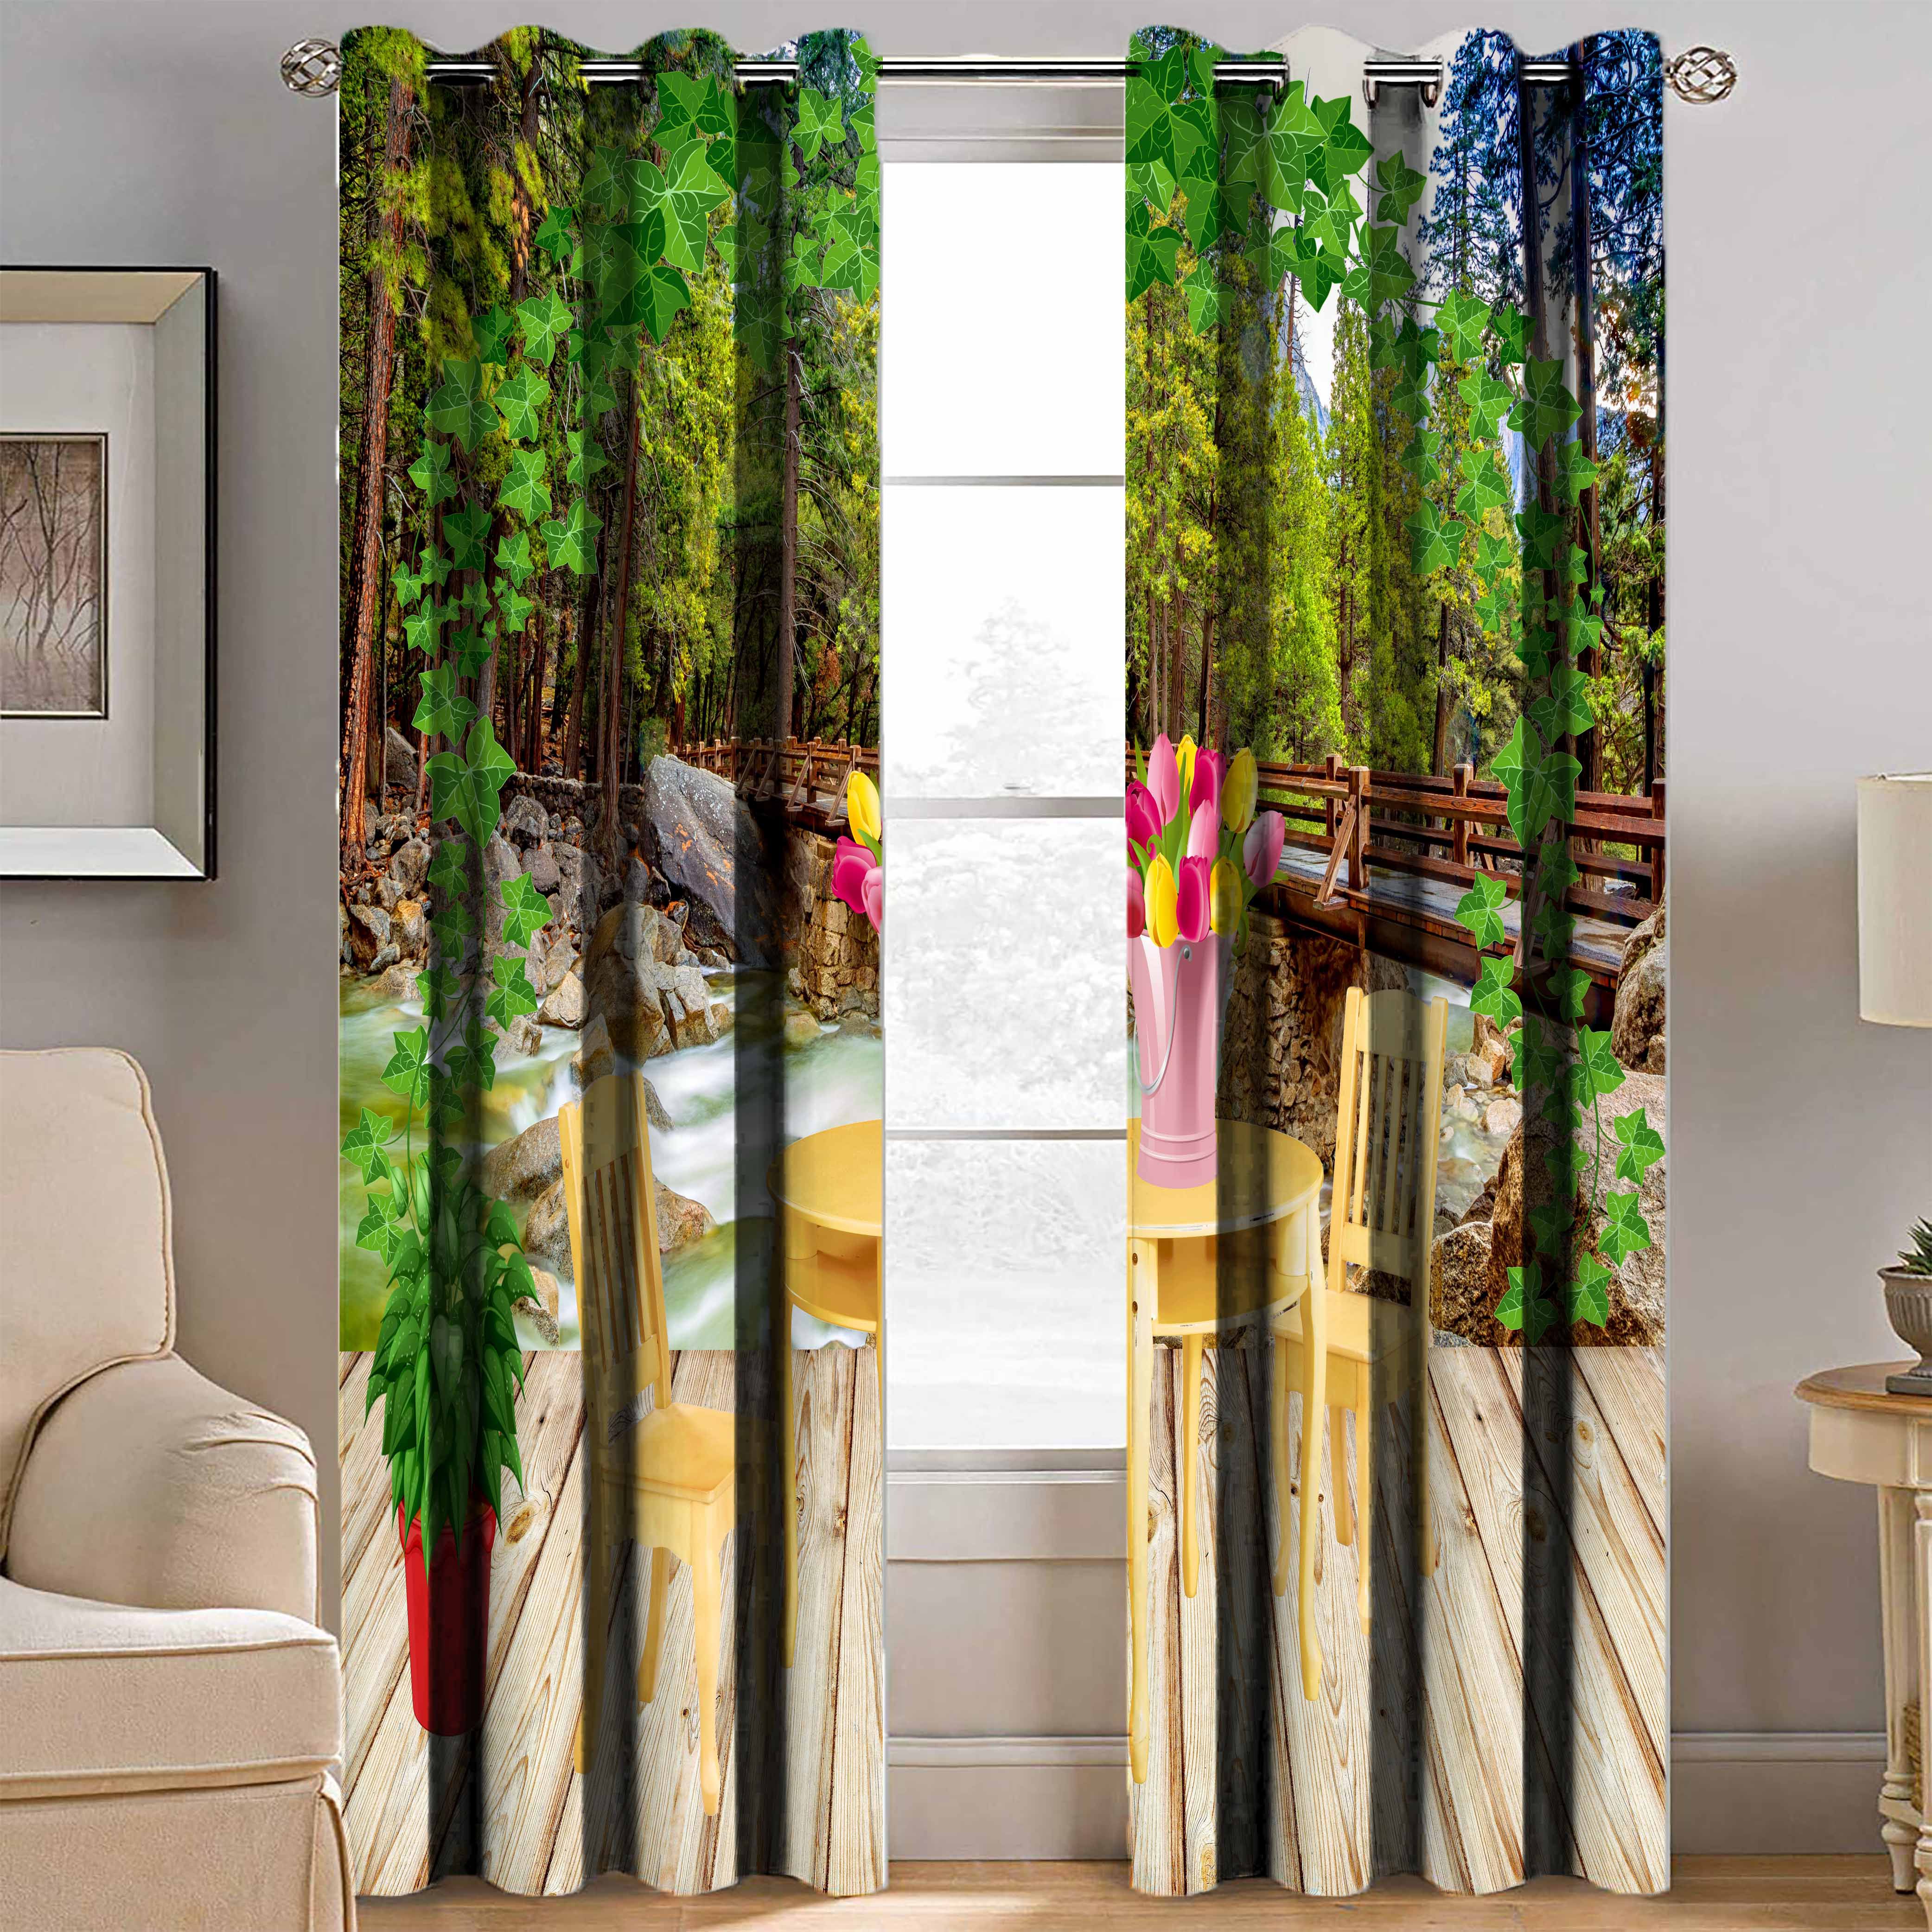     			HOMETALES Nature Semi-Transparent Eyelet Curtain 7 ft Pack of 2 Multicolor